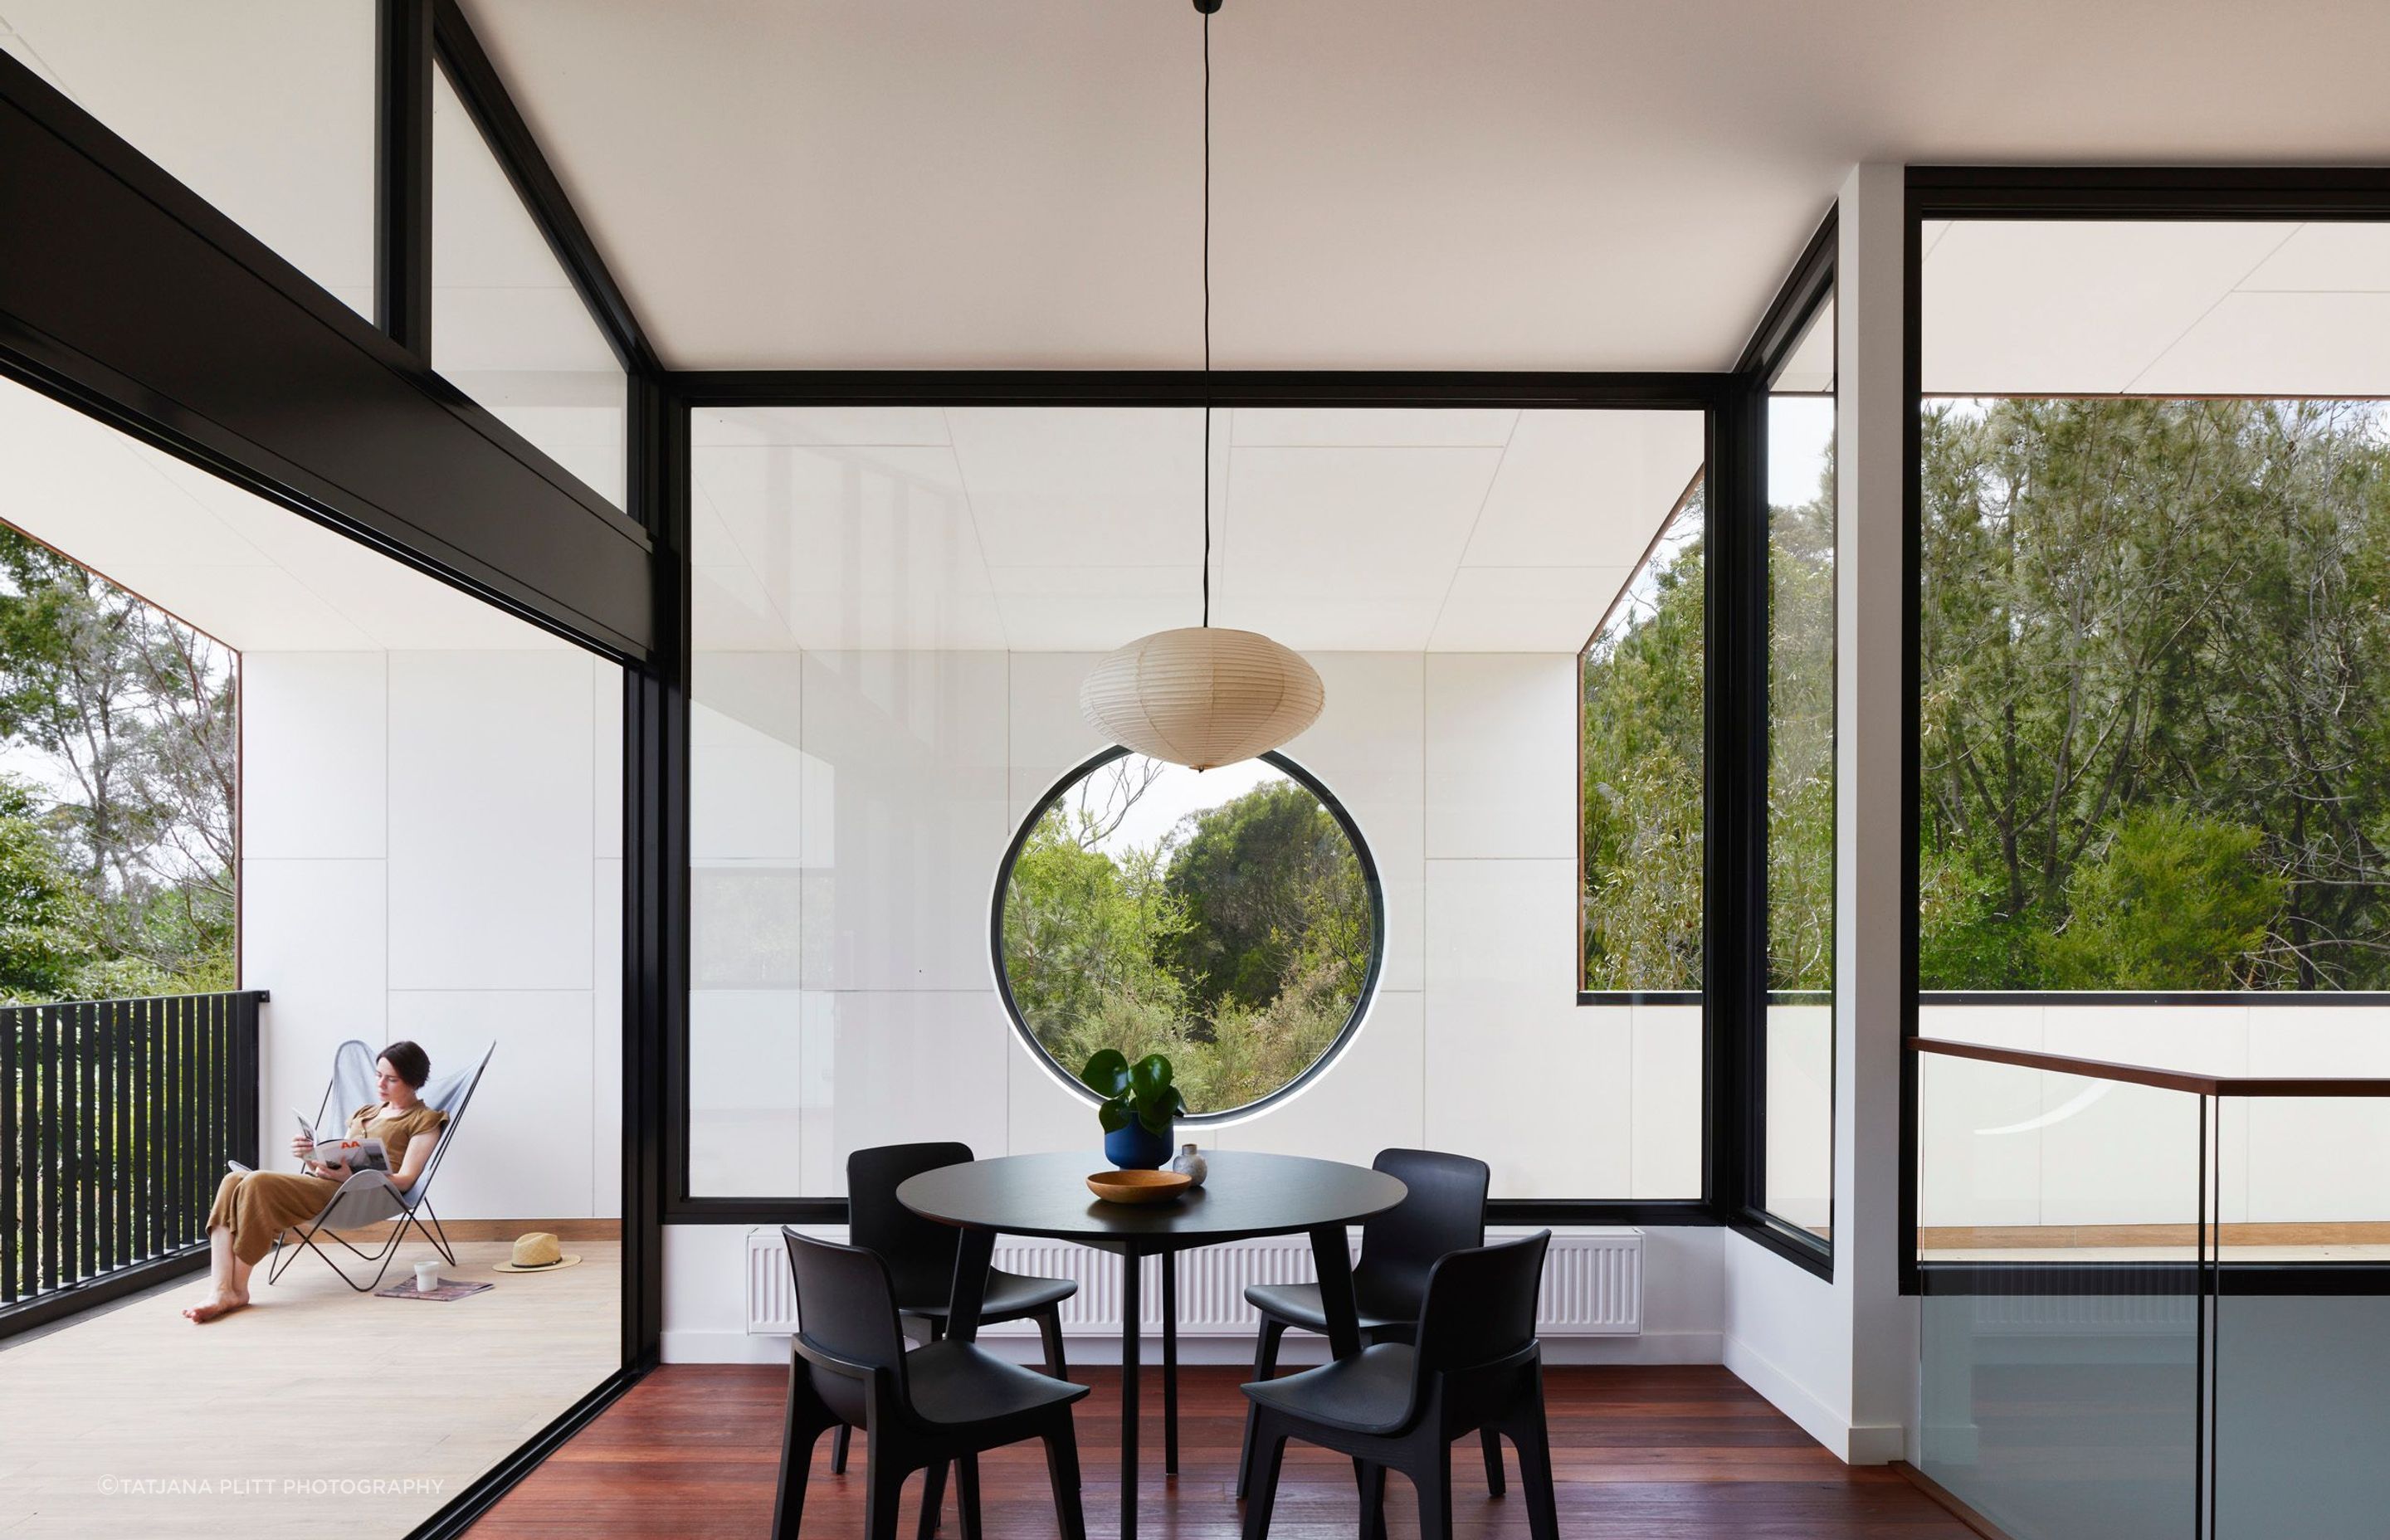 The view captured in the round window can be enjoyed from the dining area.